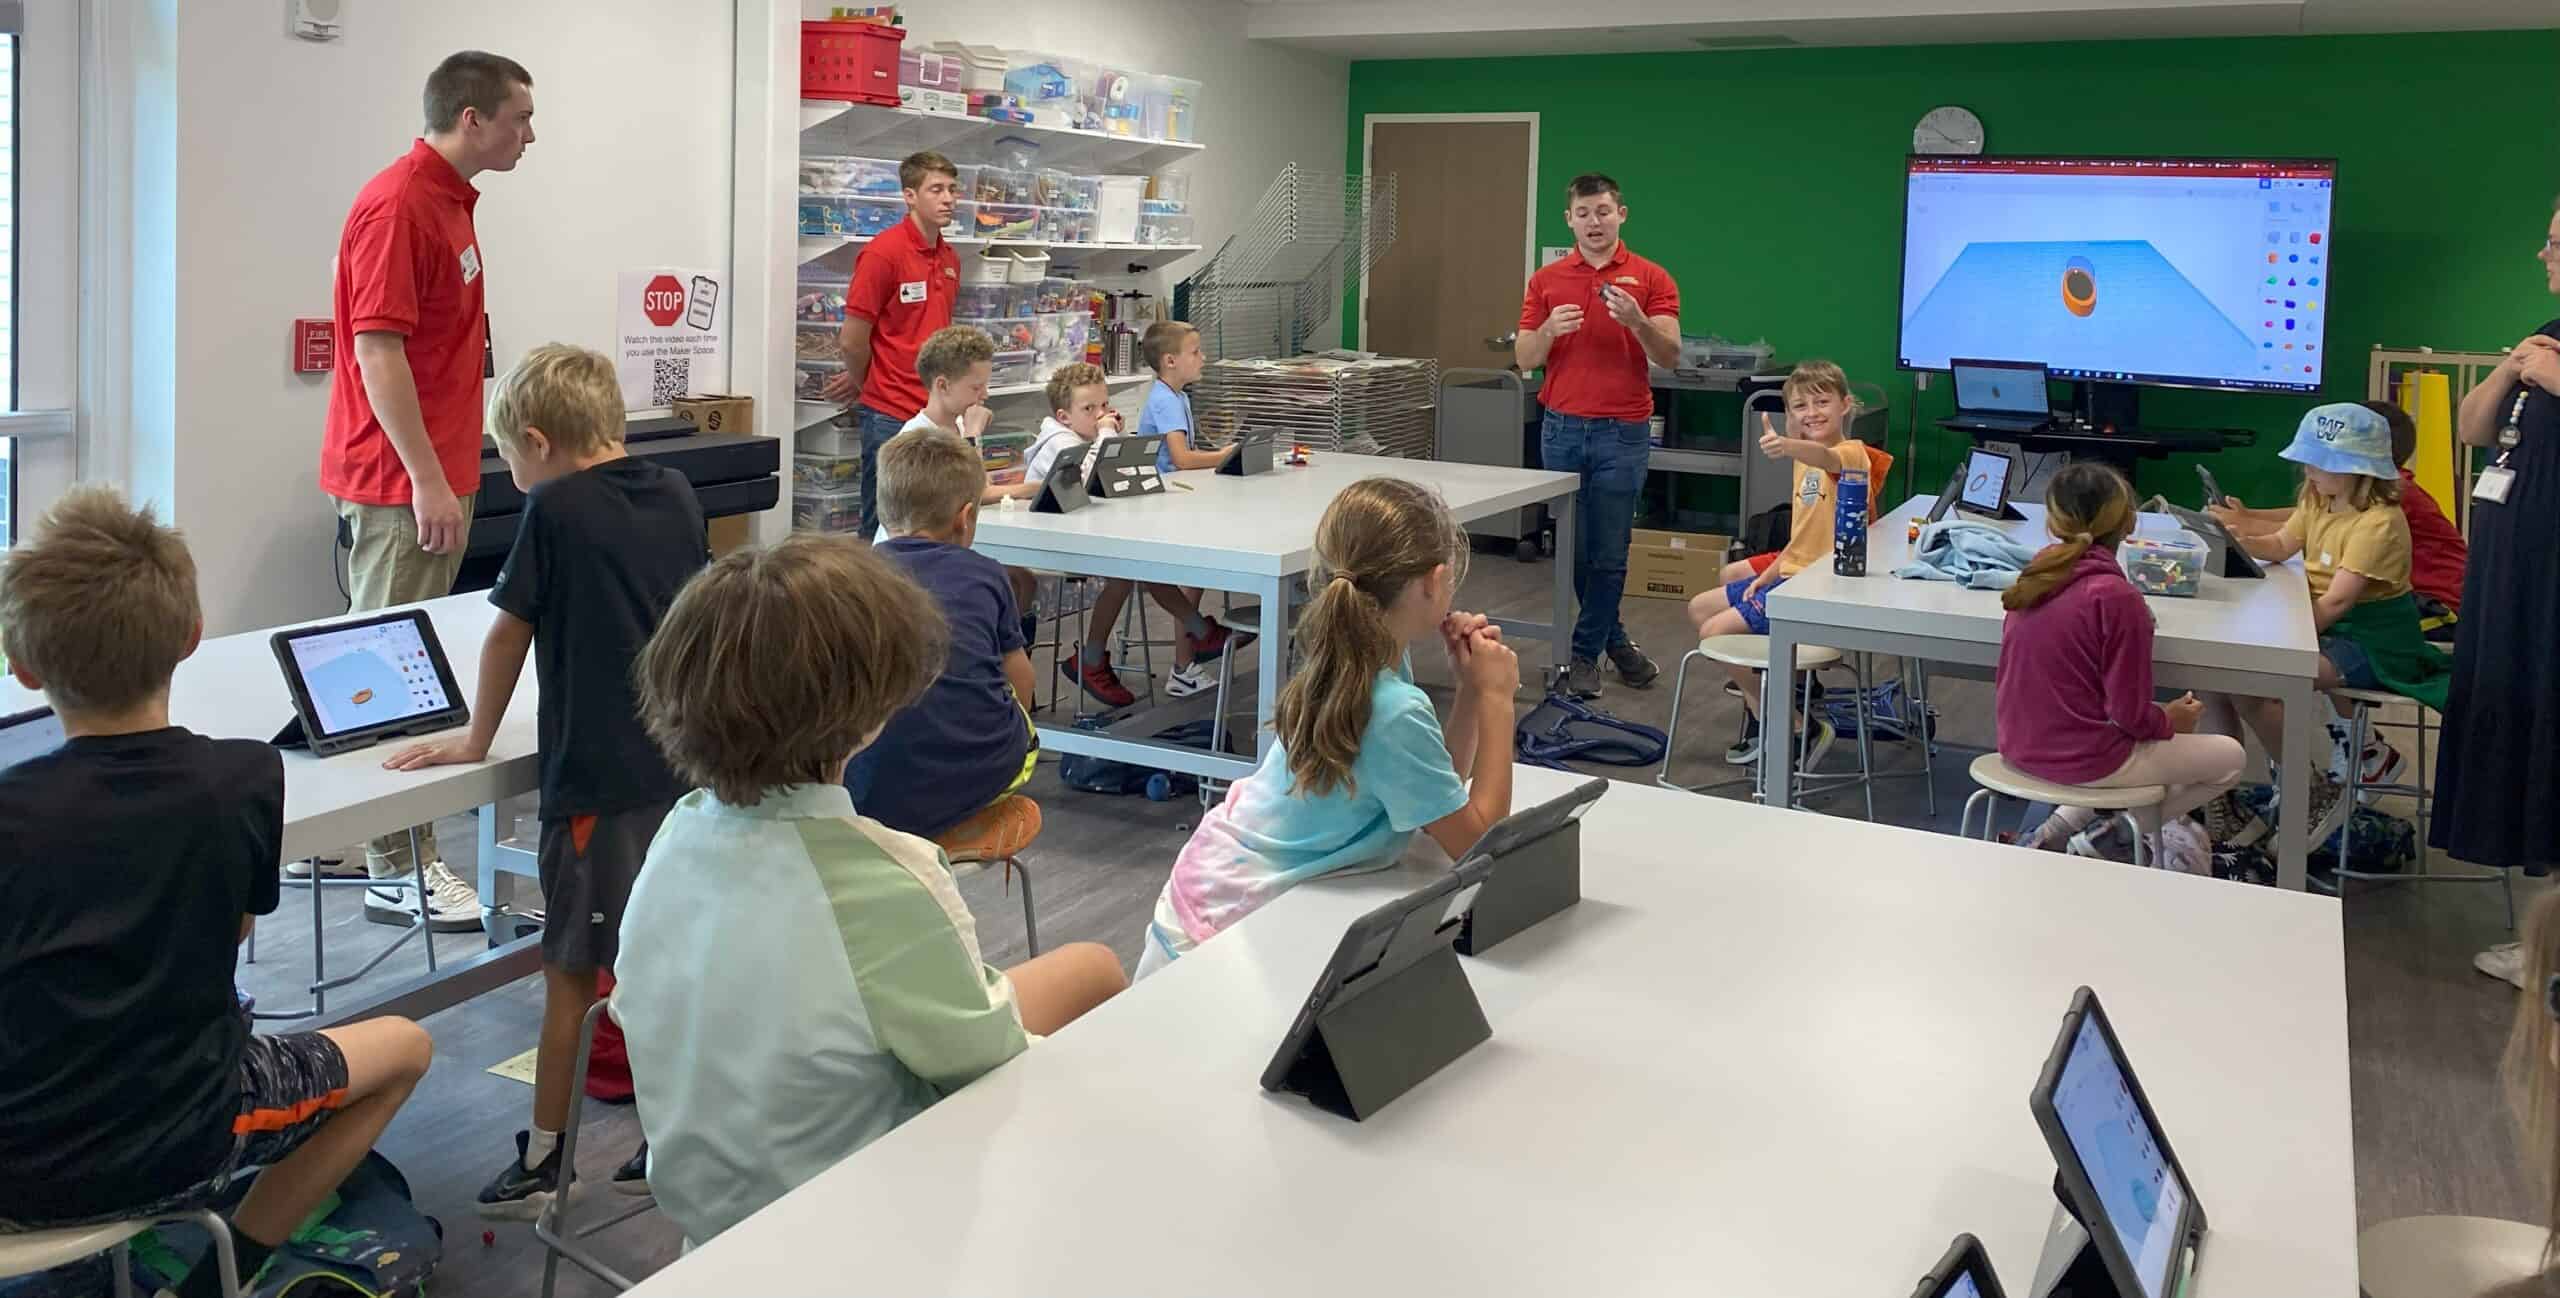 You are currently viewing Creative Fun with 3D Printing and LEGOs  After-school Class for 1st to 5th Grades | 4/5/24 to 5/17/24 | Tremont Elementary (Please put dismissal in comment section: SACC, Pick Up or Walk)